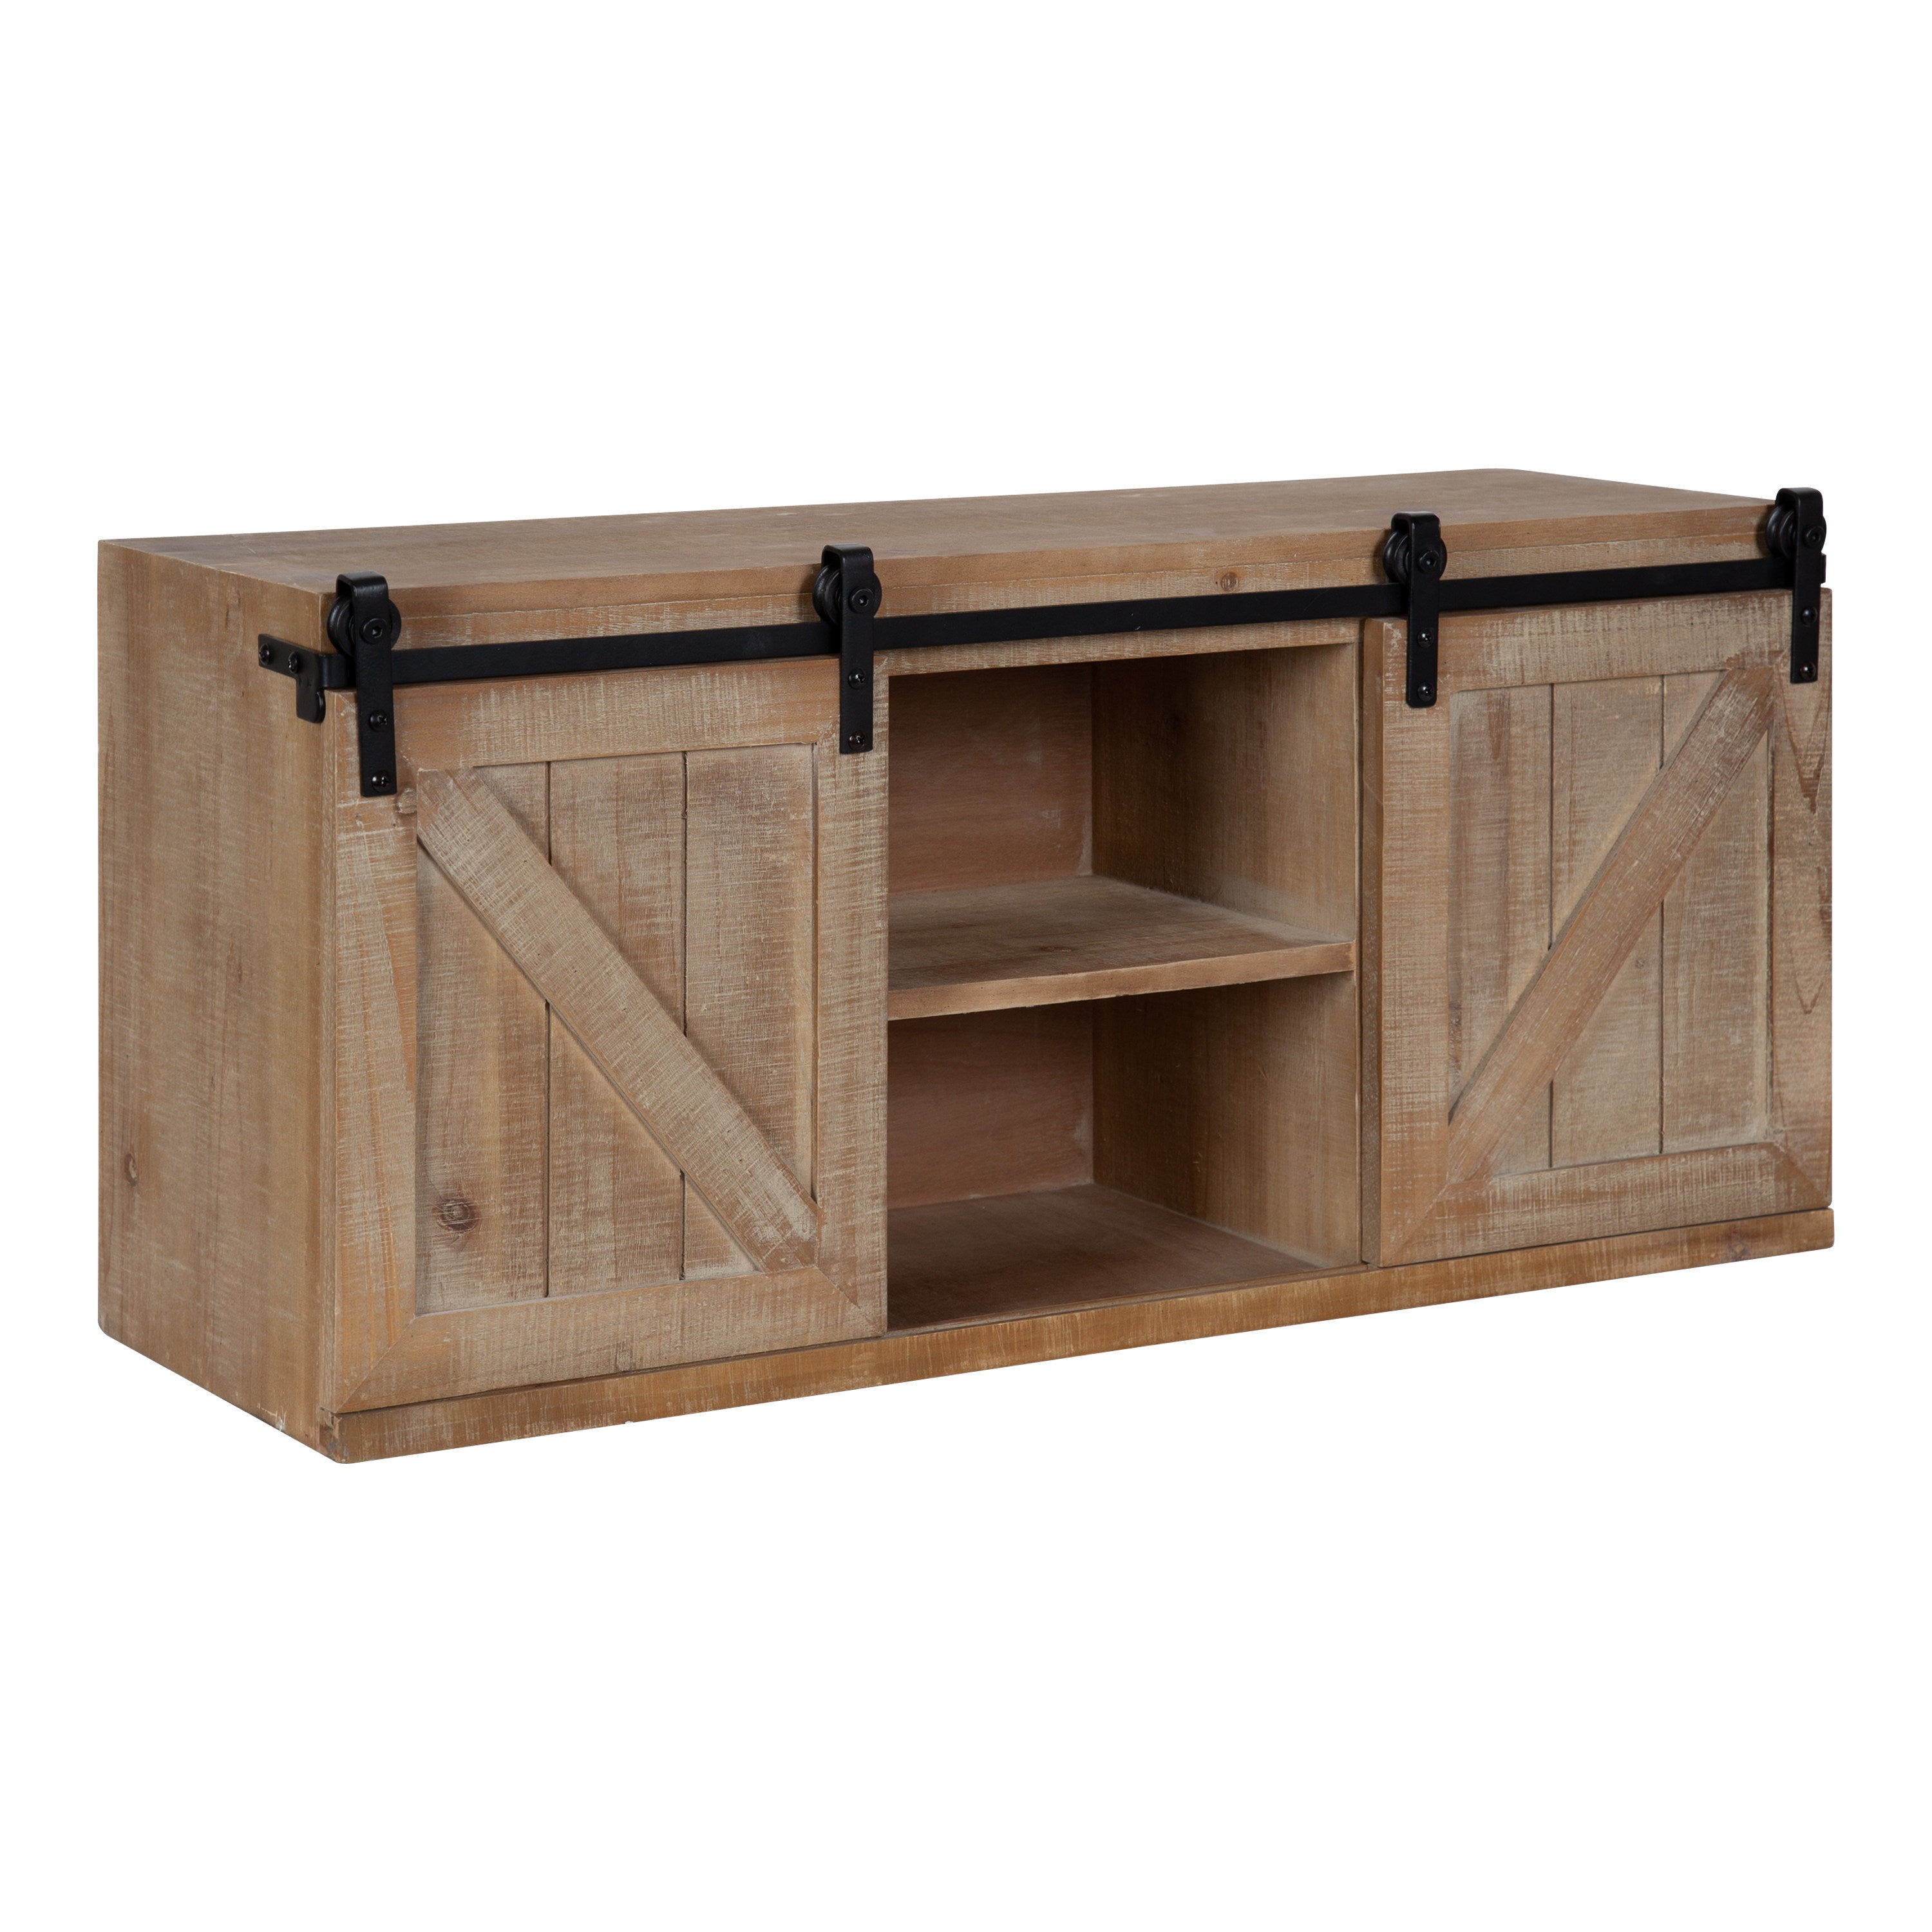 Cates Decorative Wood Wall Storage Cabinet with Sliding Barn Doors